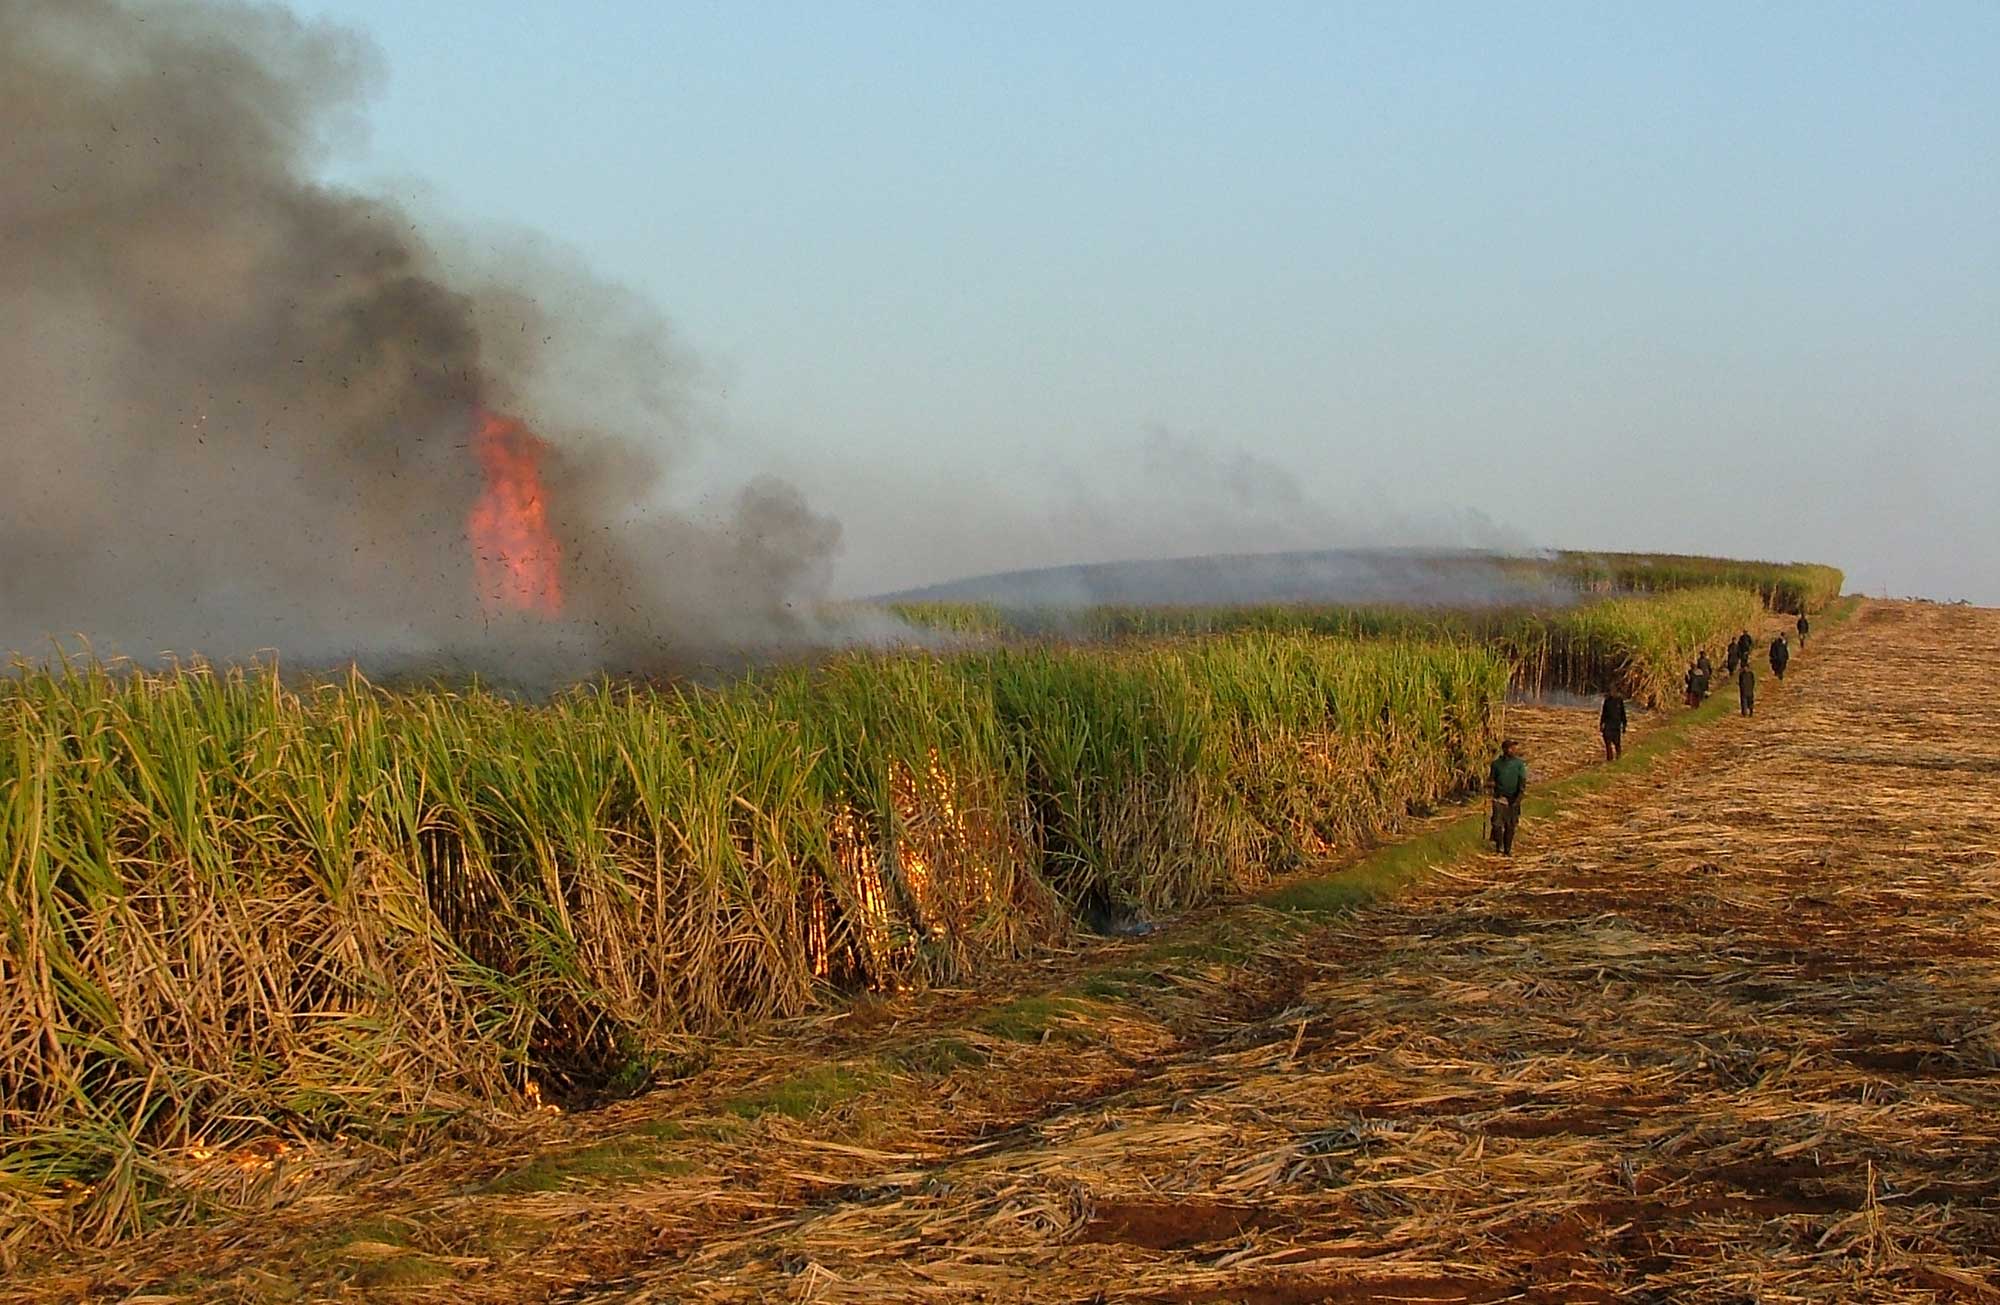 Photograph of a field of sugarcane being burnt in South Africa. The photo shows a field, one half with standing sugarcane, the other half already harvested. Flames and smoke can be seen emerging from the field of sugarcane in the background. A row of people stand next to the field.